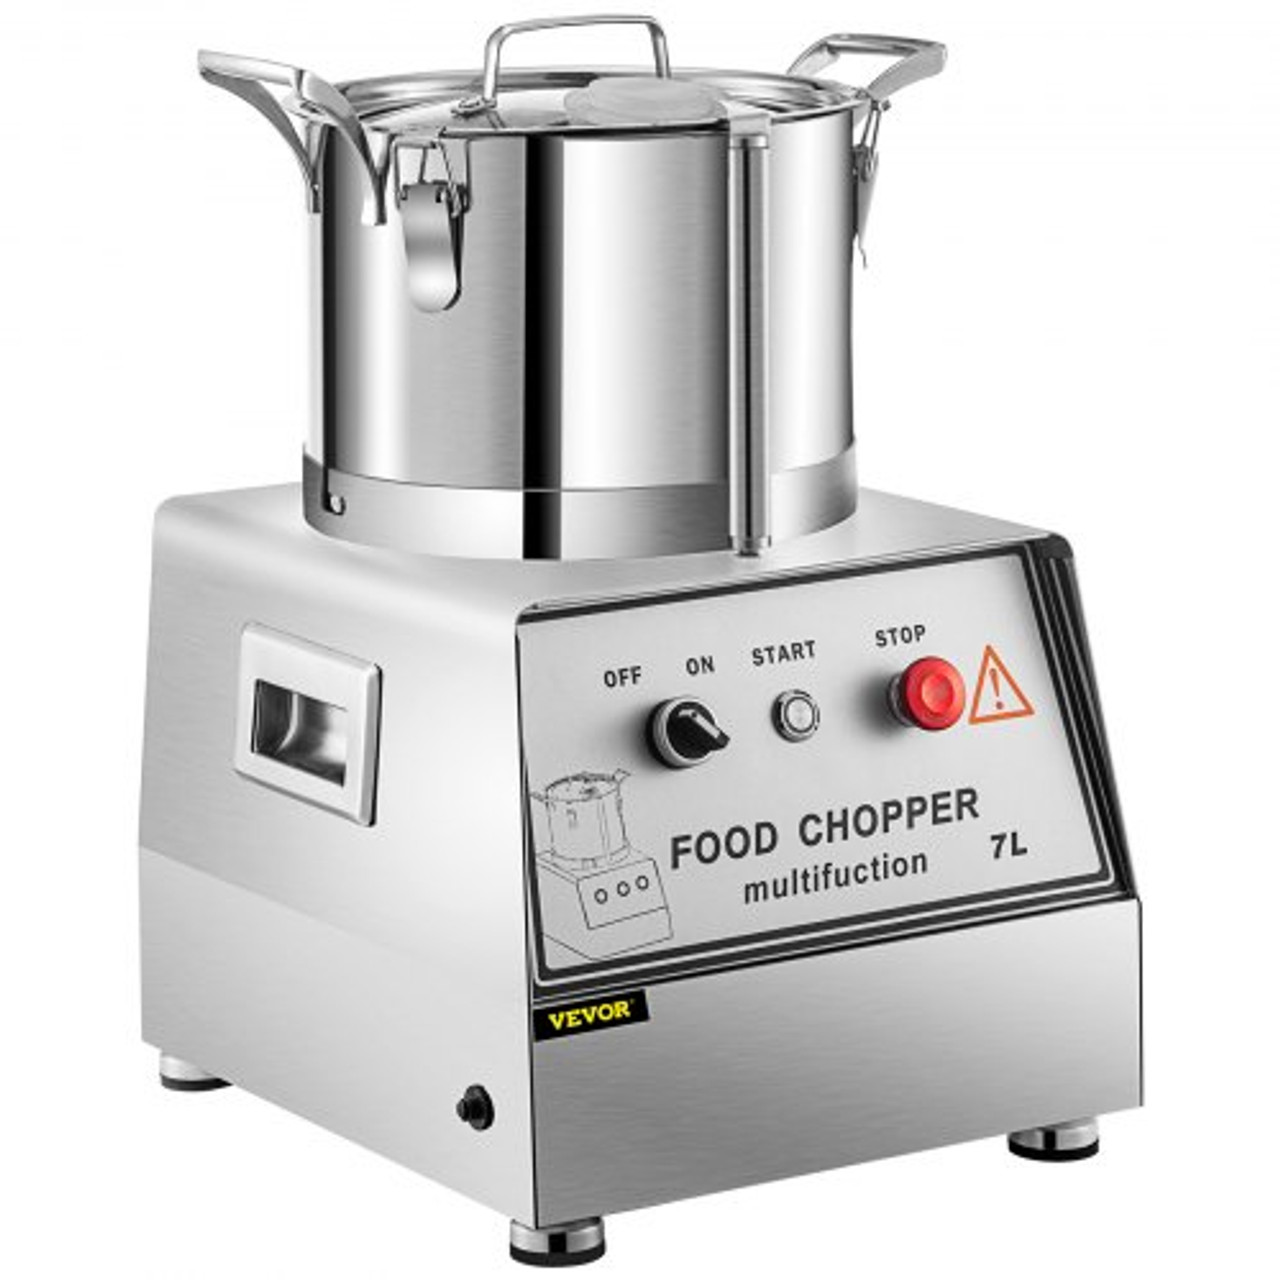 110V Commercial Food Processor 7L Capacity 750W Electric Food Cutter Mixer 1400RPM Stainless Steel Processor Perfect for Vegetables Fruits Grains Peanut Ginger Garlic